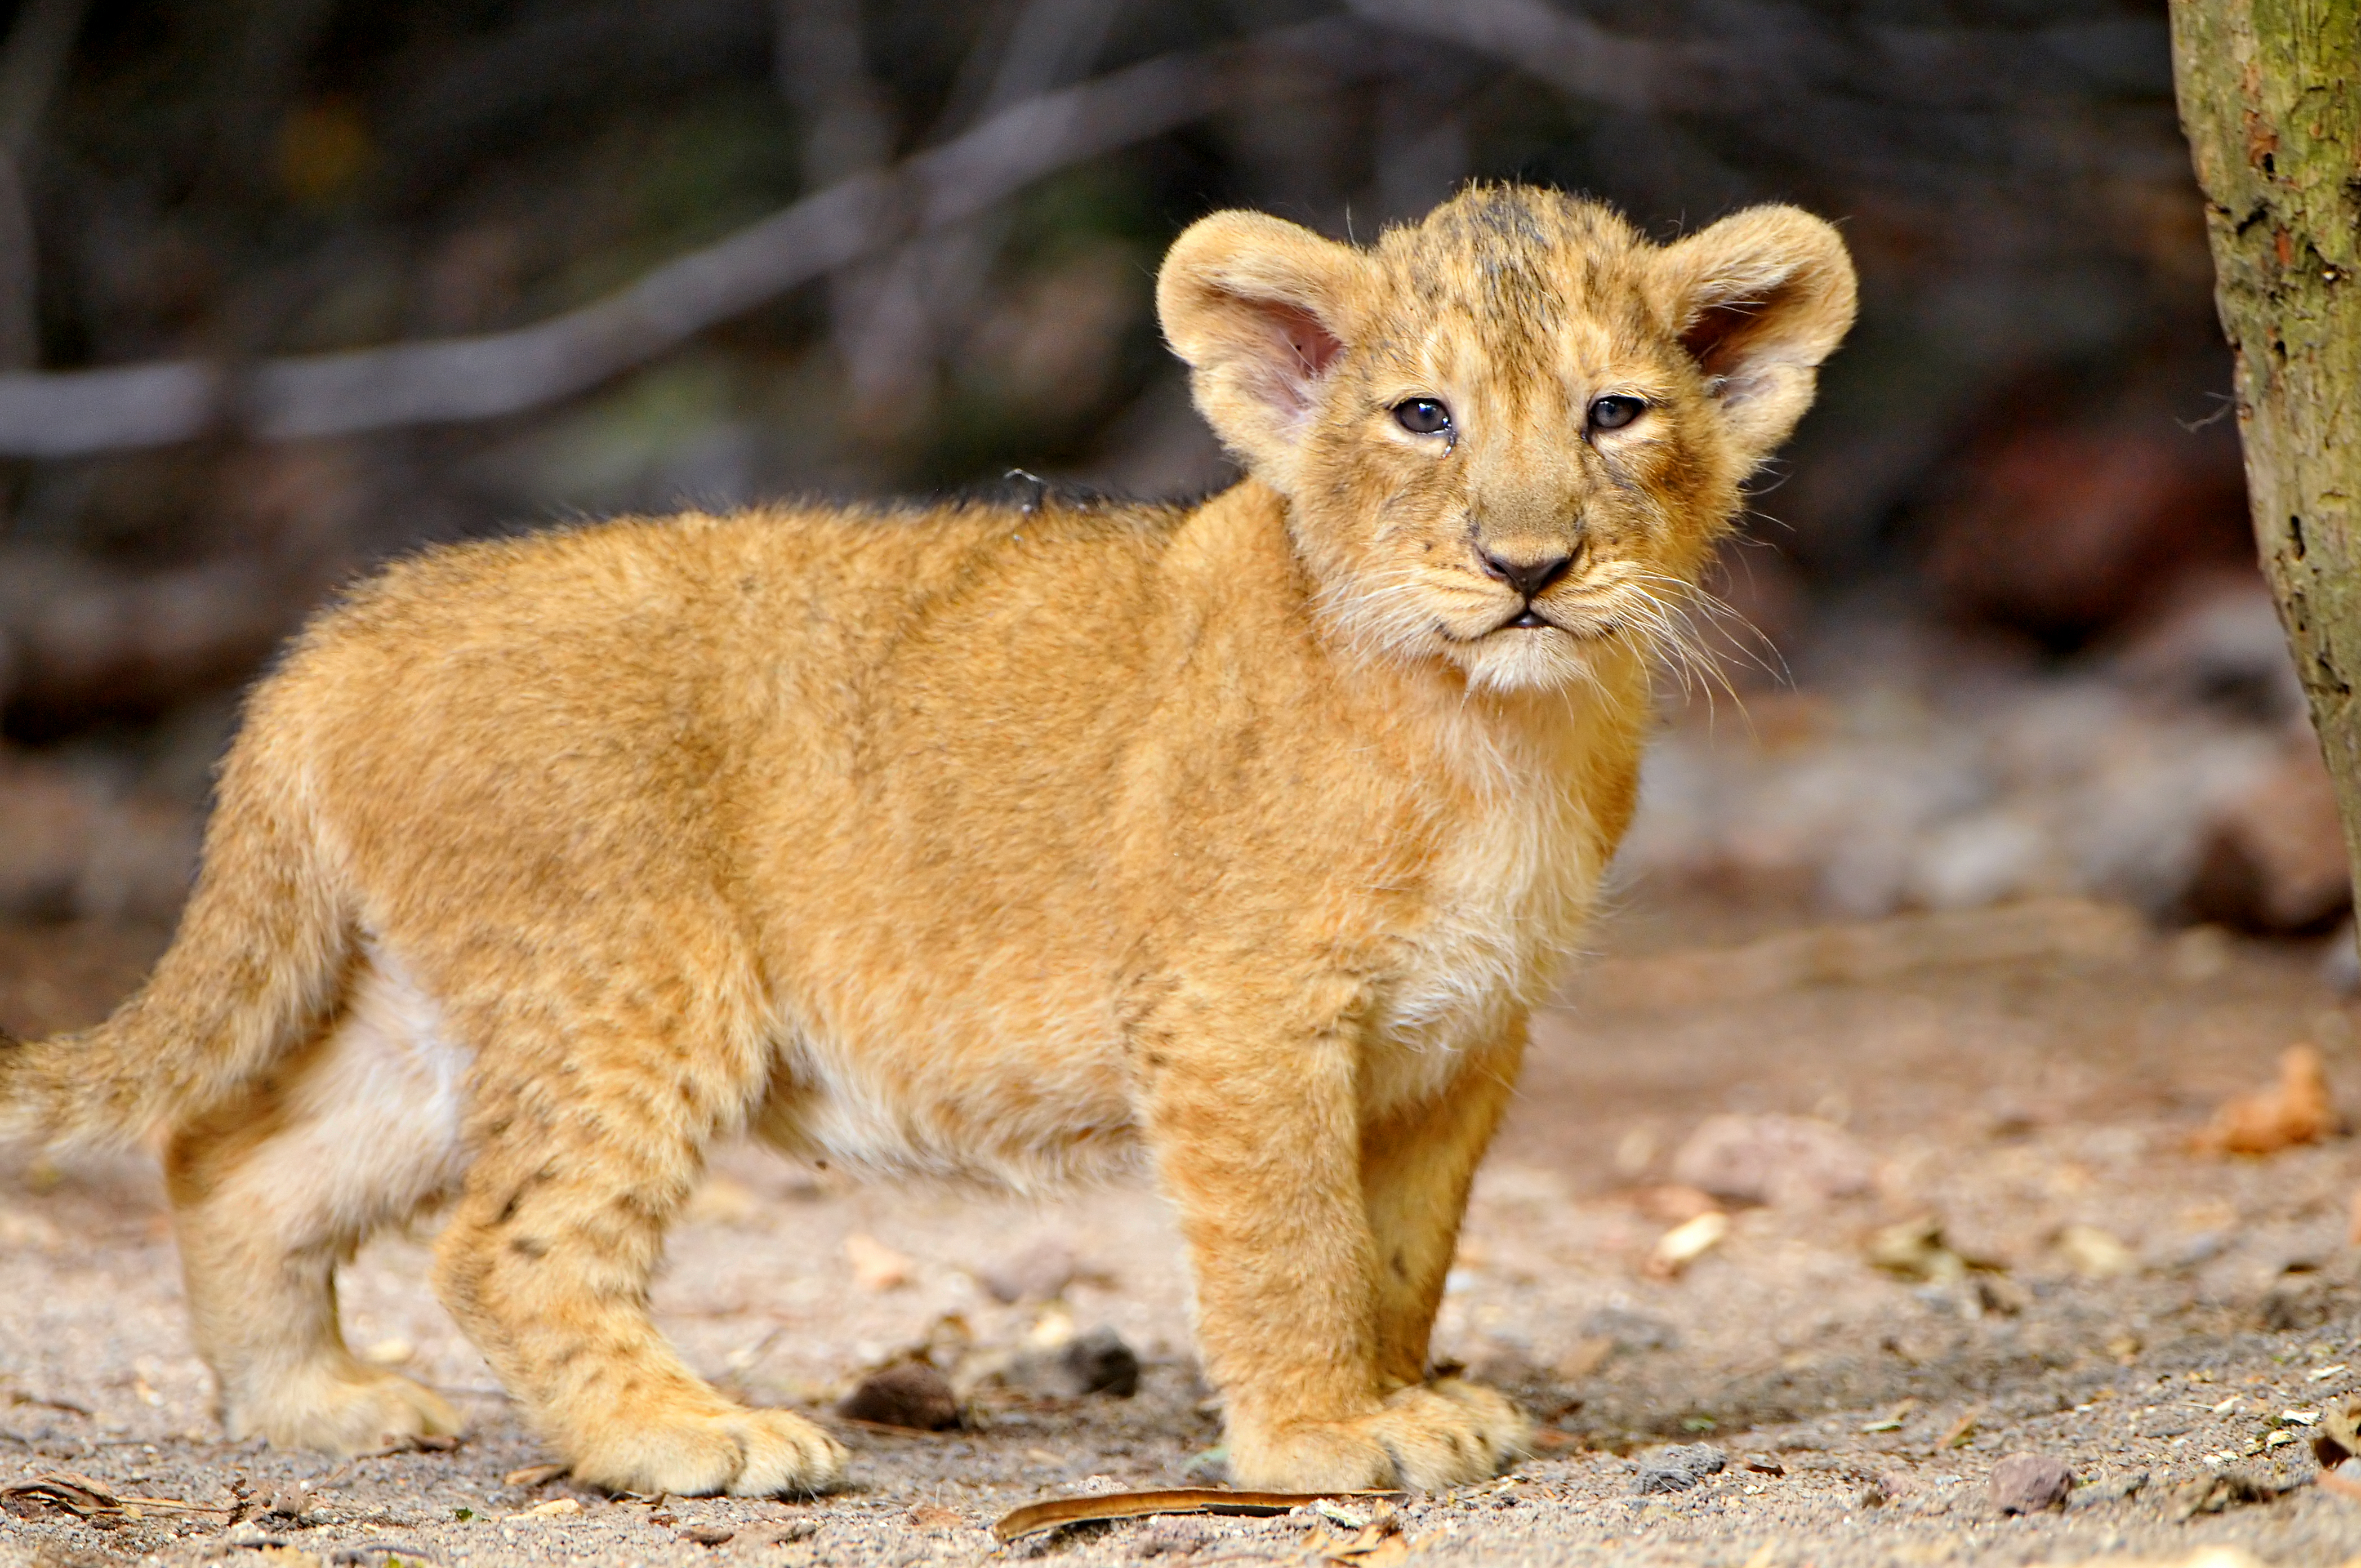 That's a cute little lion cub! | Flickr - Photo Sharing!
